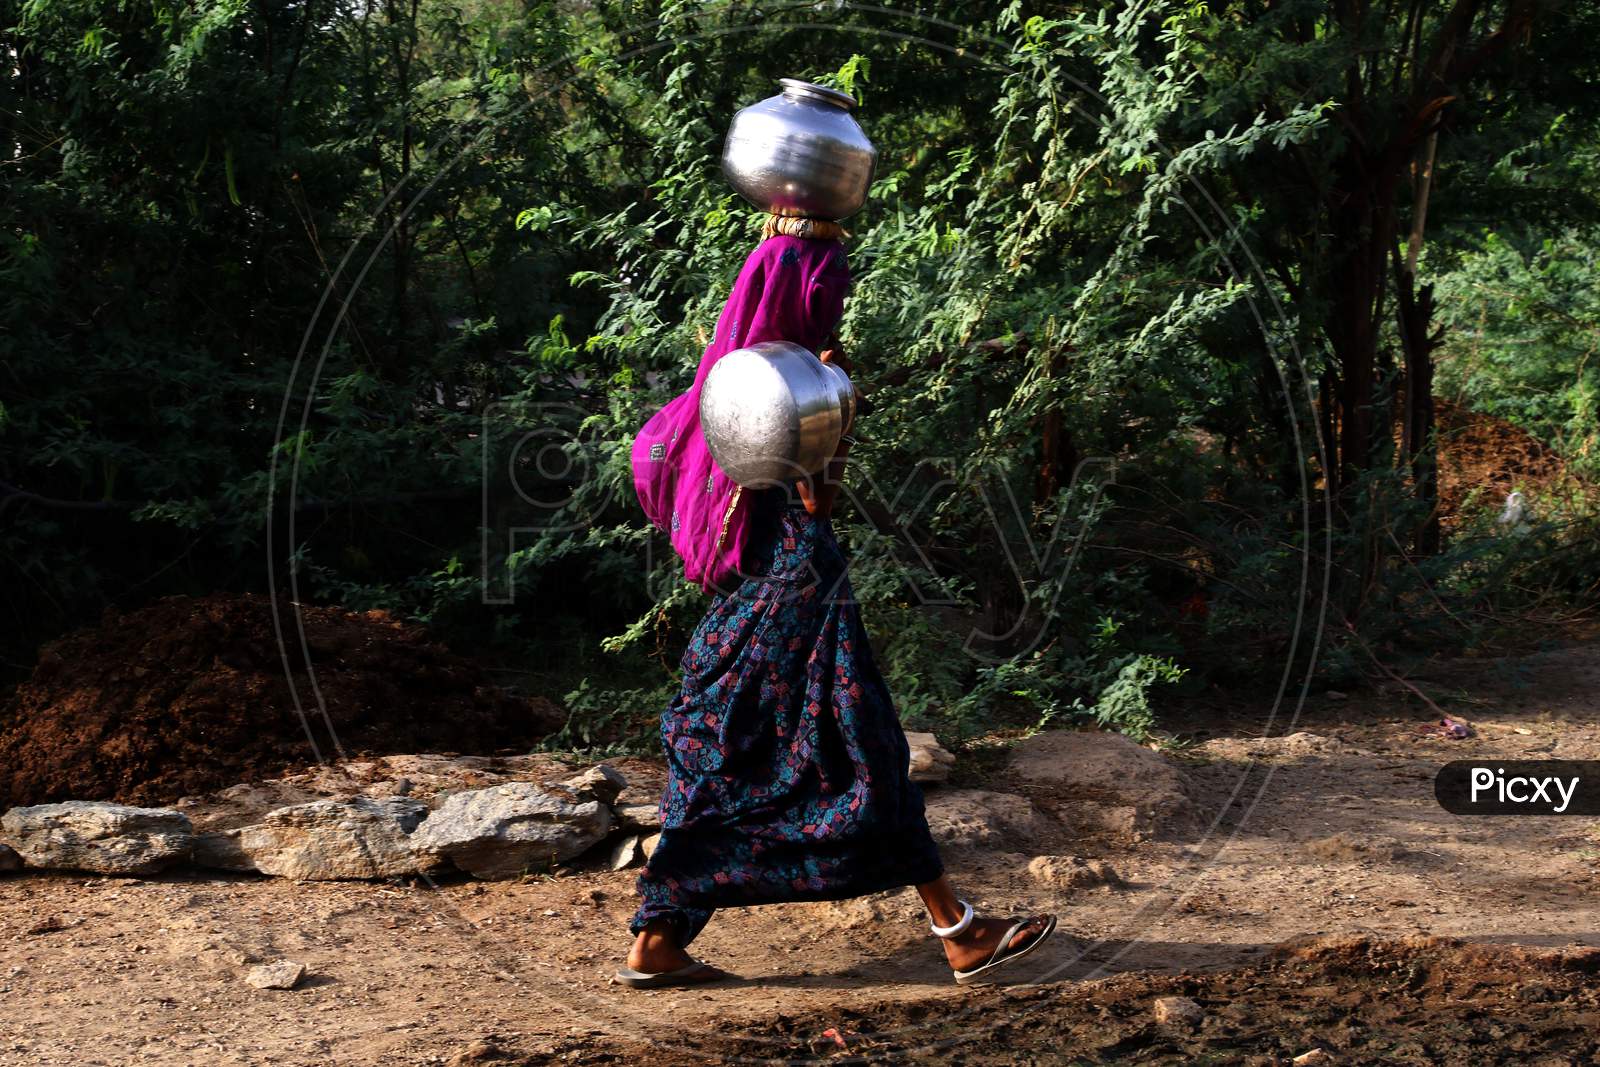 A Rajasthani Village Woman Collects Drinking Water During Hot Summer Day On The Outskirts Of Ajmer, In The Indian State Of Rajasthan On May 29, 2020.